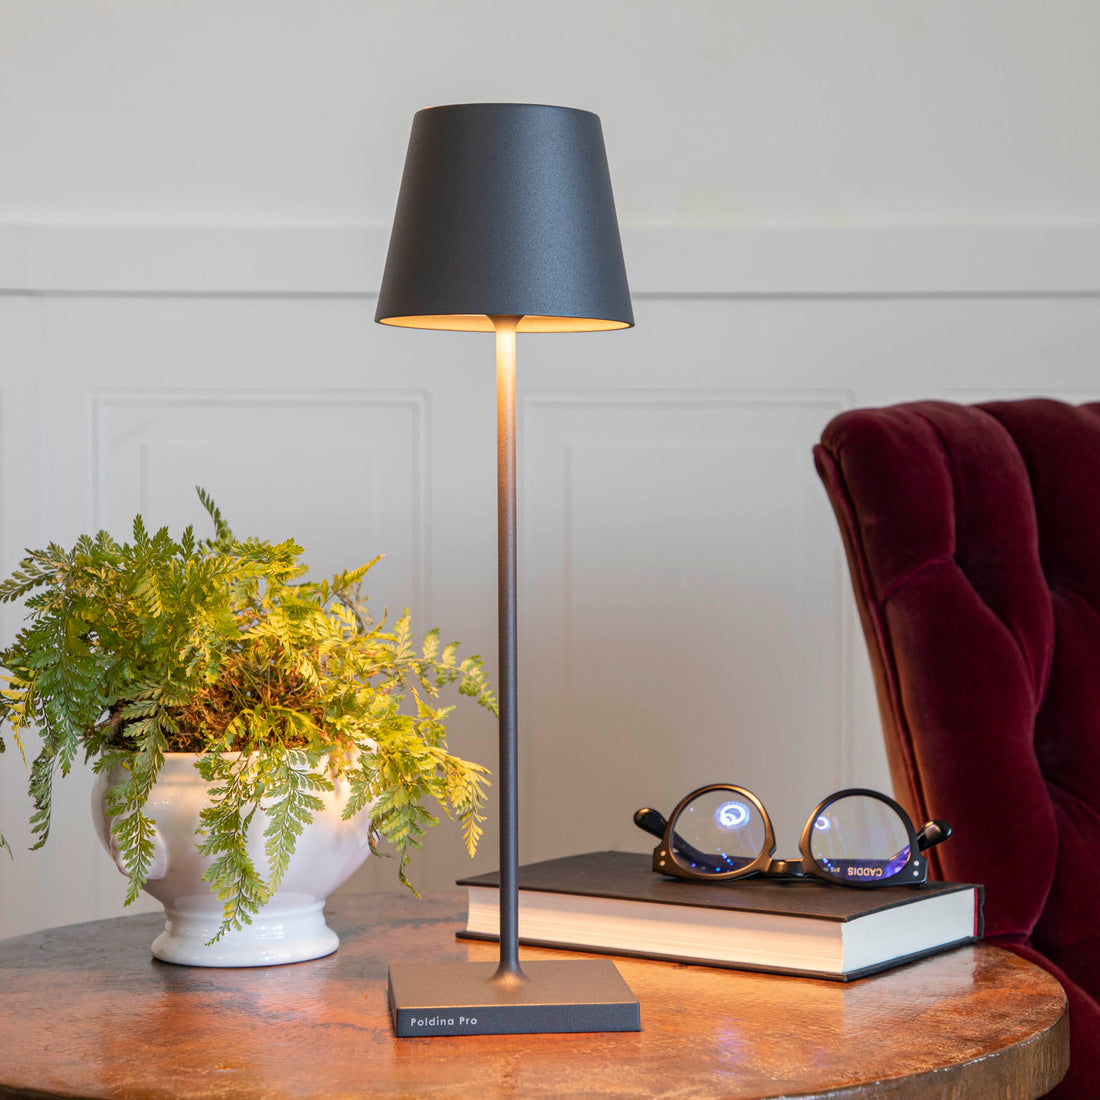 A touch-dimming control Zafferano Dark Grey Cordless Lamp on a table next to a book and a plant.